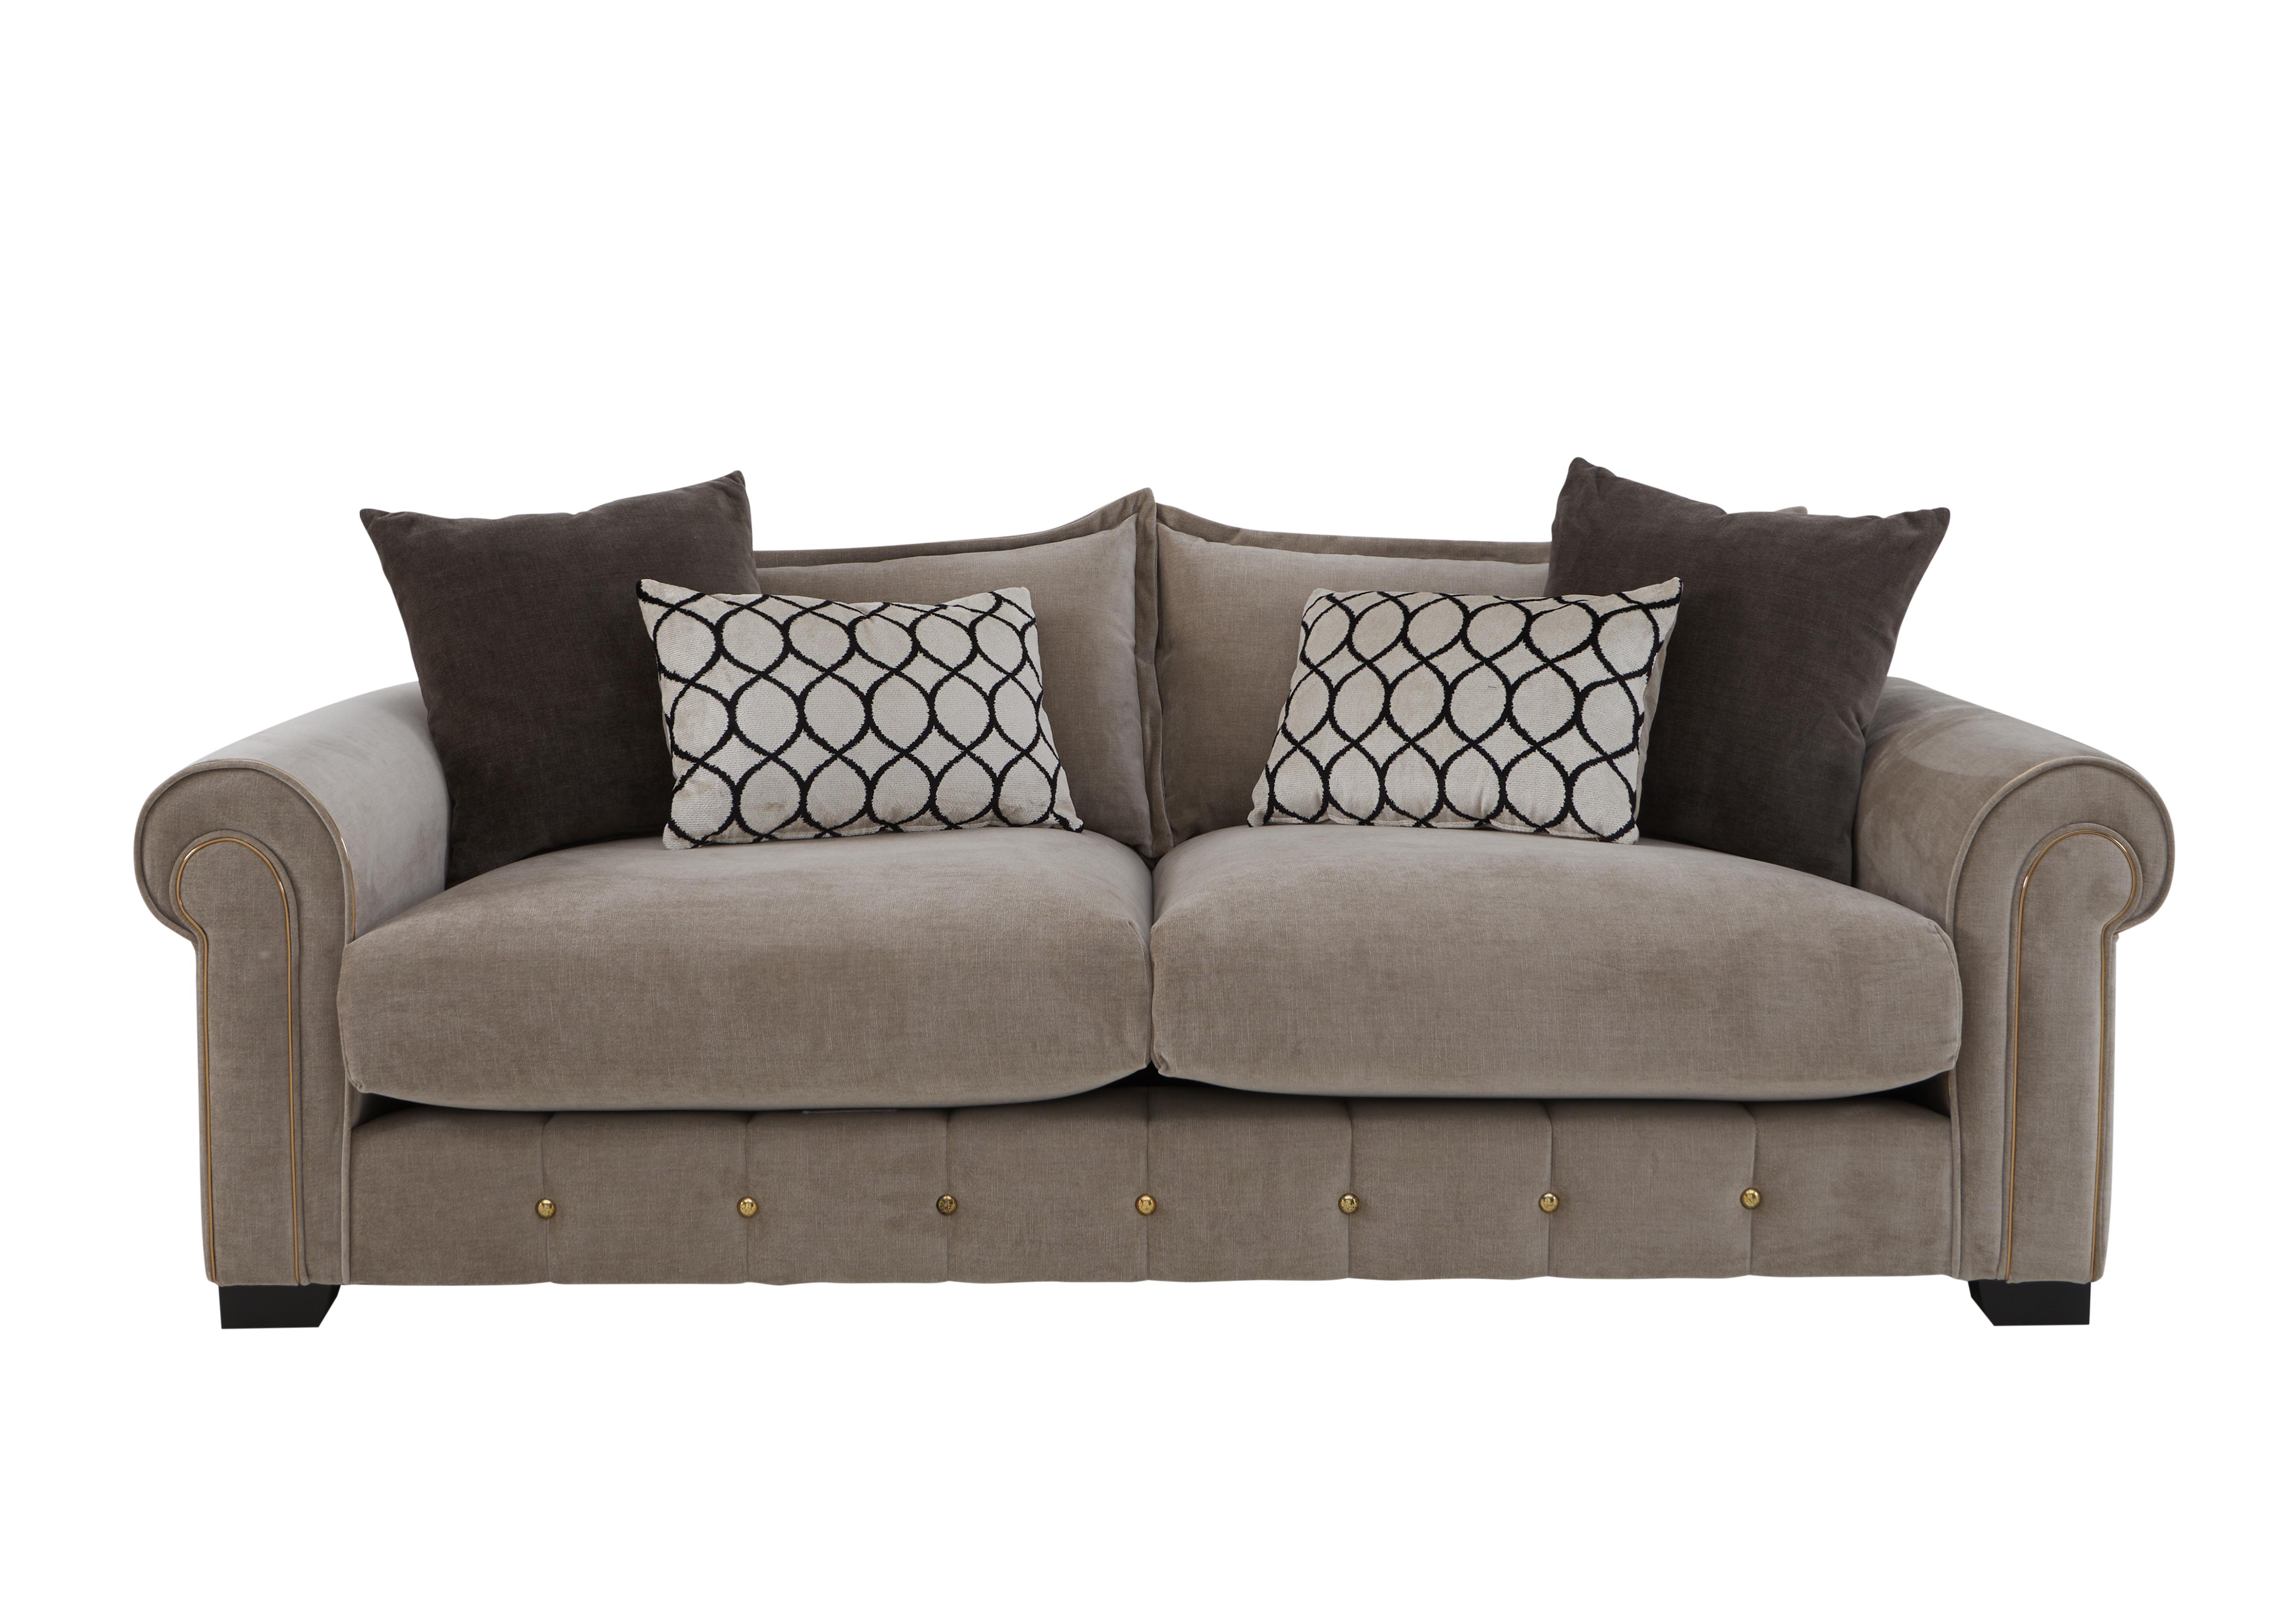 Sumptuous 4 Seater Fabric Sofa in Chamonix Wicker Dk/Gold on Furniture Village